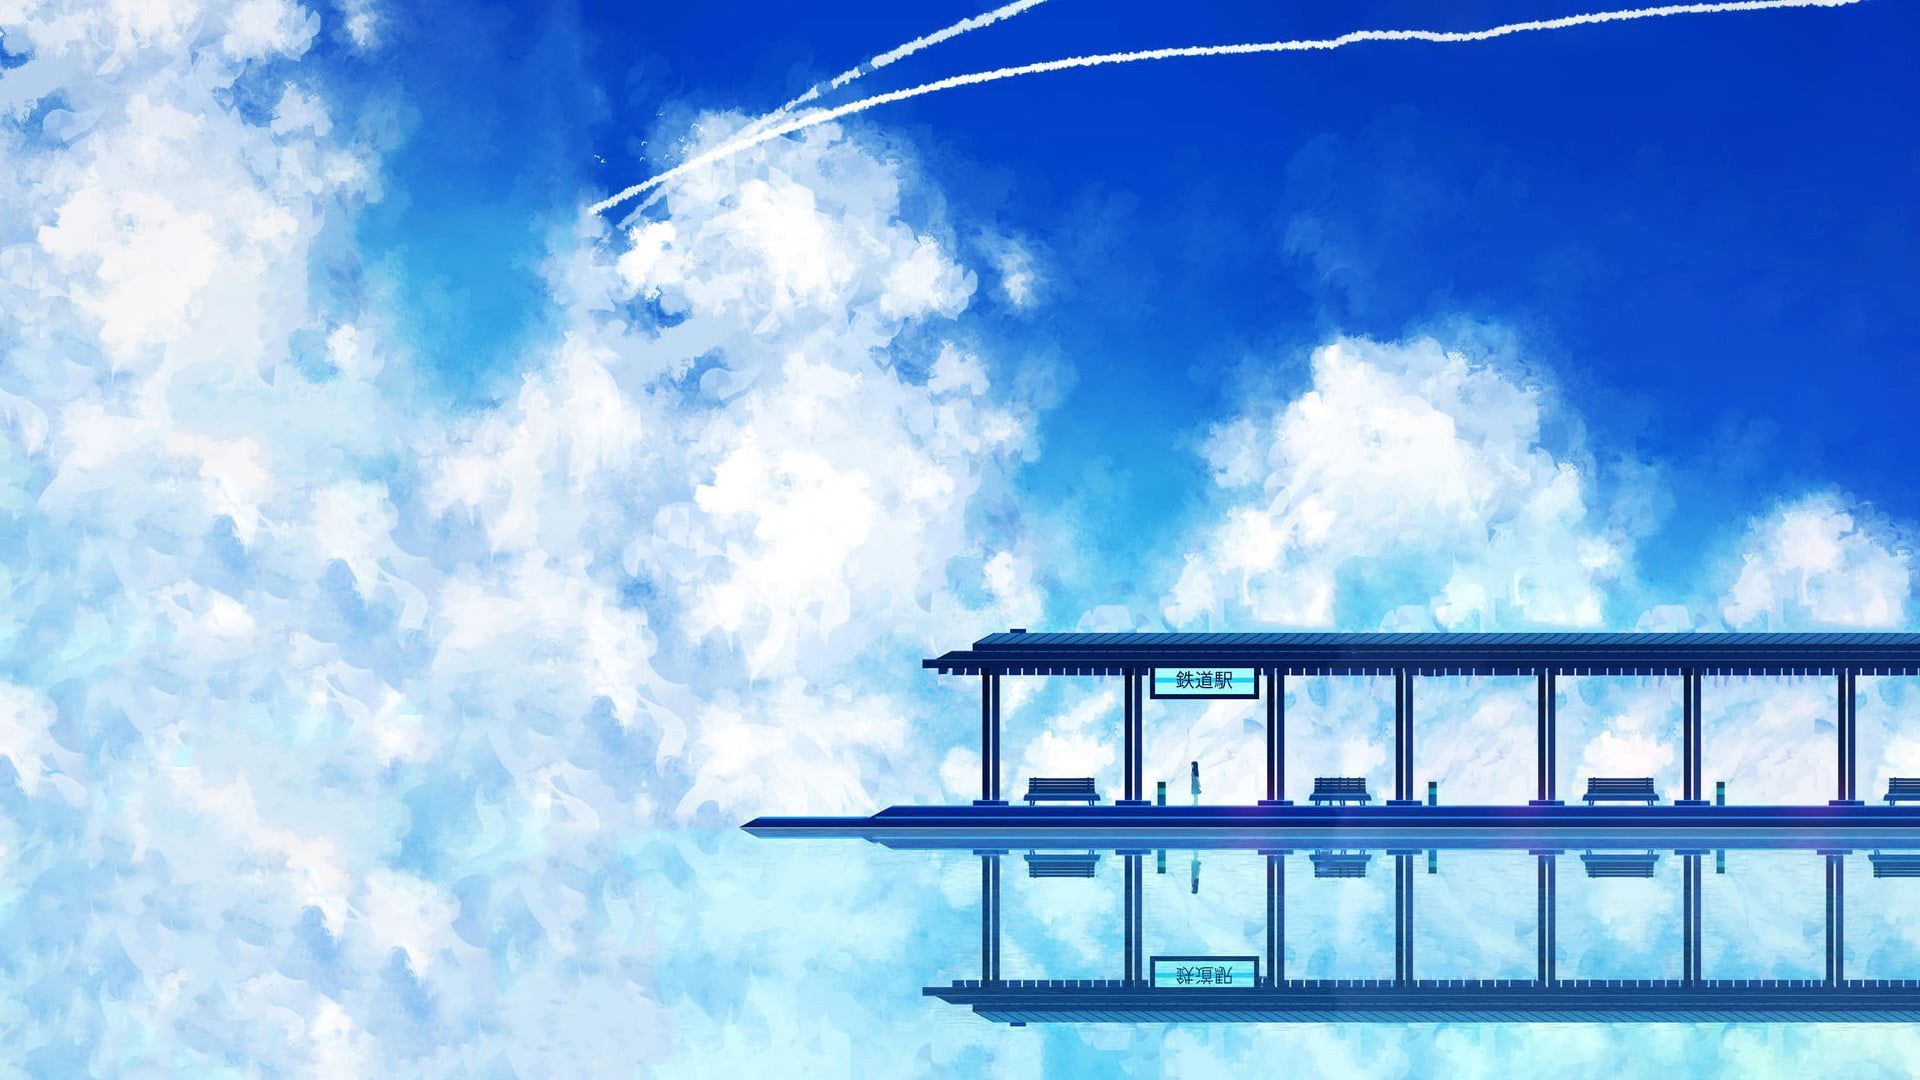 SeerLight #artwork #clouds #anime #sky #reflection P #wallpaper #hdwallpaper #desktop. Wallpaper, Clouds, Sky reflection